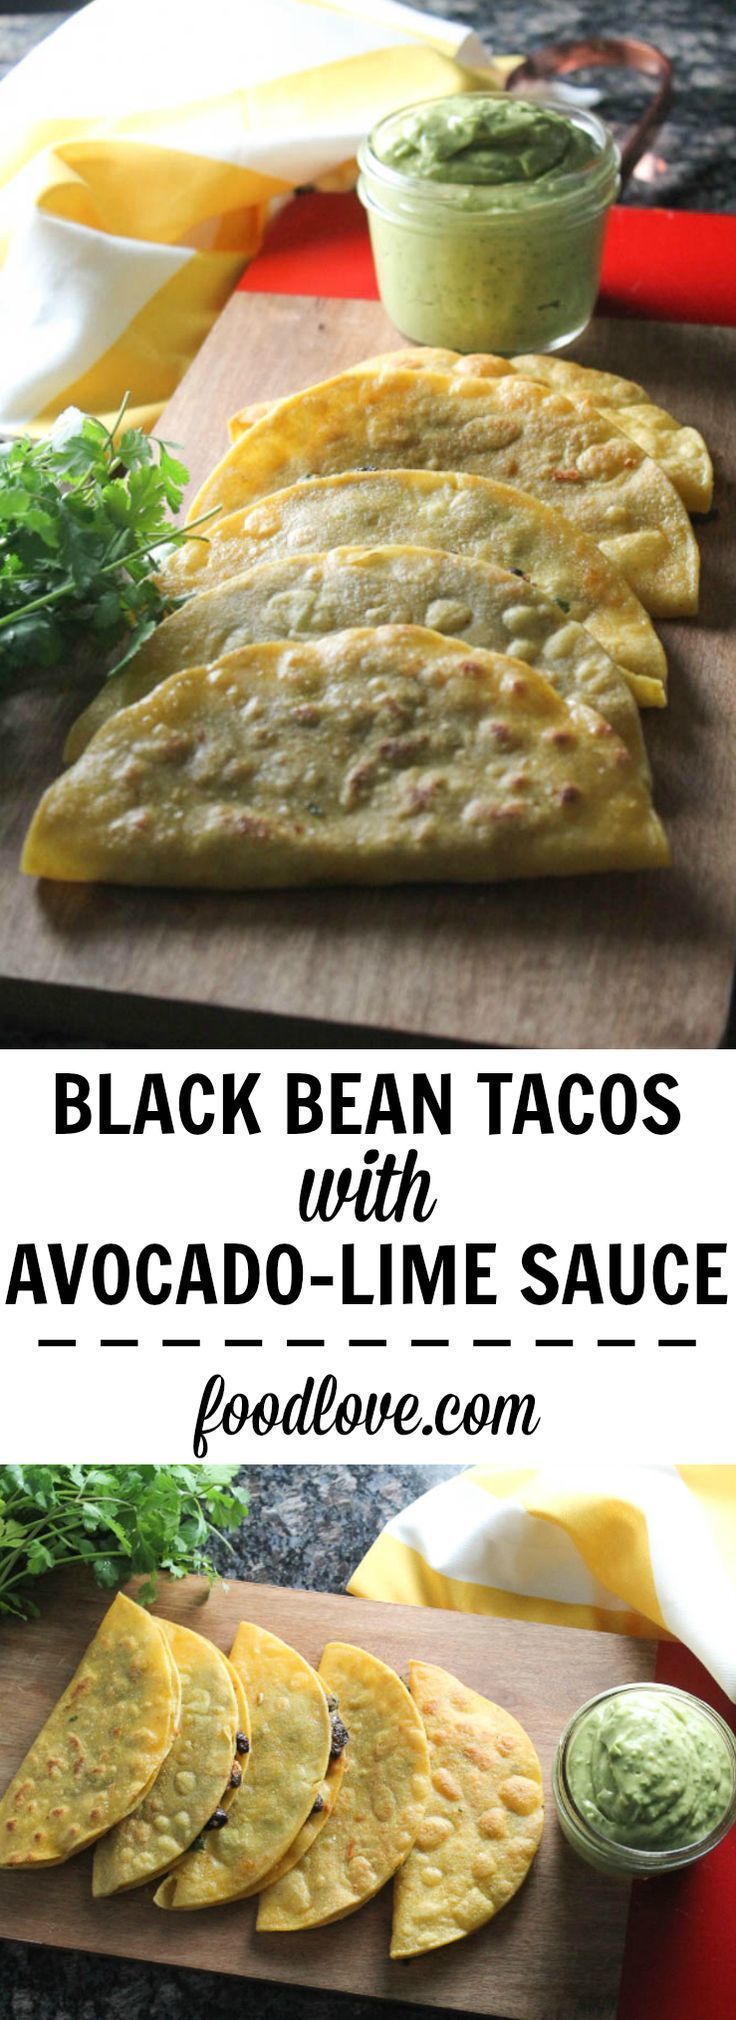 Crispy Black Bean Tacos with Avocado-Lime Sauce: a quick and easy vegetarian meal, loaded with flavor.